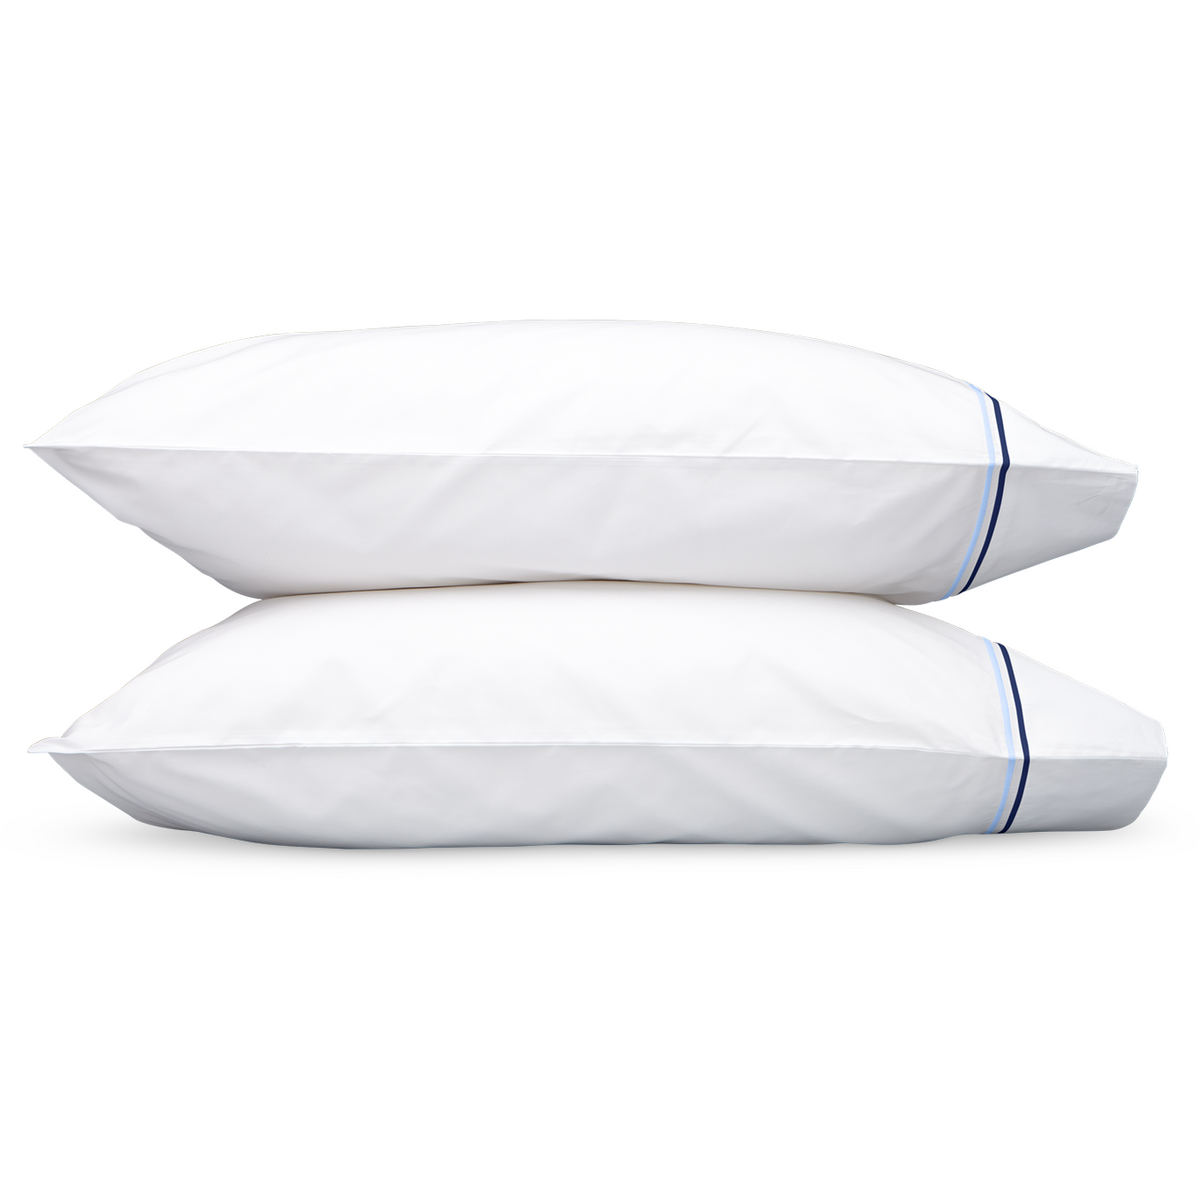 Matouk Essex High End Bed Pair of Two Pillowcases - Navy